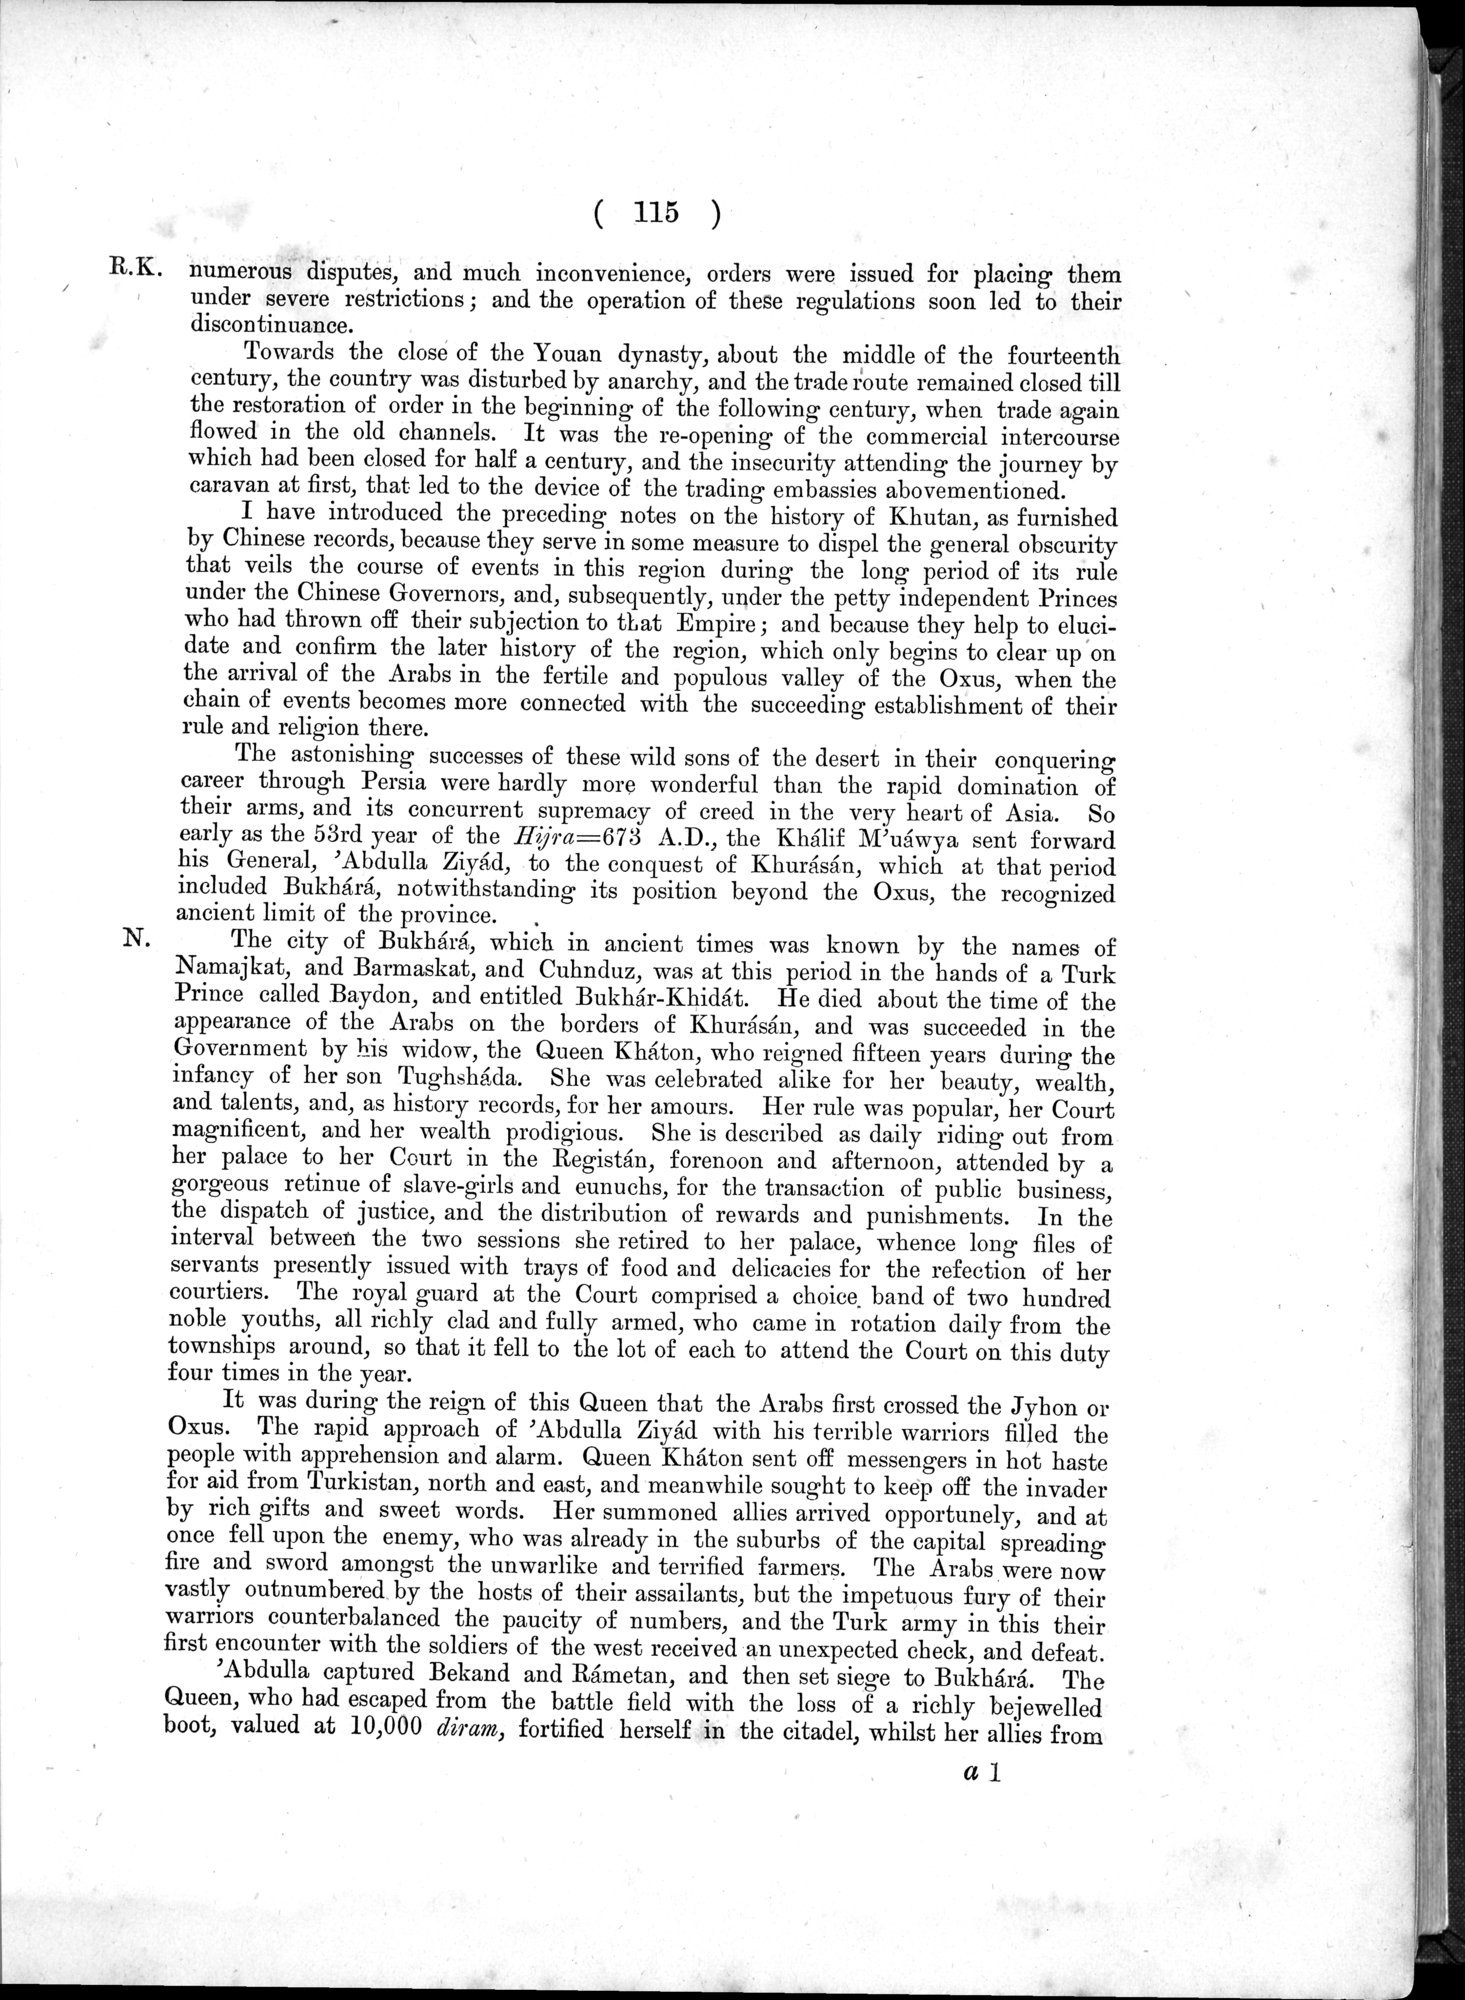 Report of a Mission to Yarkund in 1873 : vol.1 / Page 175 (Grayscale High Resolution Image)